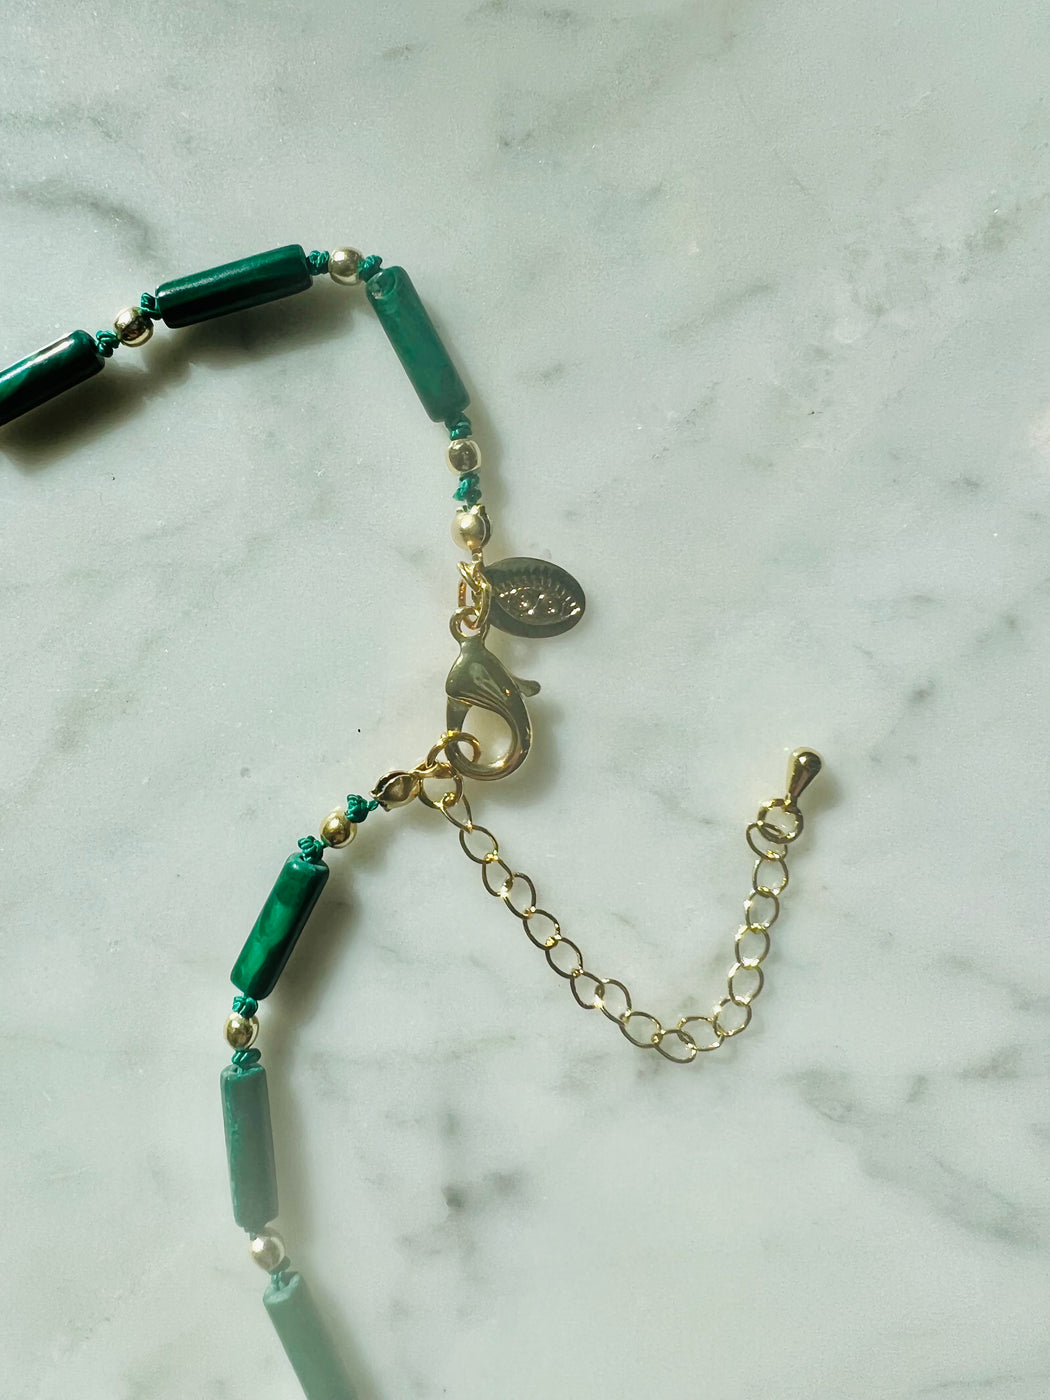 Rise from the ashes. Face your shadows & alchemize the darkness into light with the help of Malachite - the stone of Transformation. Hand knotted on silk chord, Roman gold coin with gold fill beads to light the way ~ 22" necklace designed by Carrie Marill